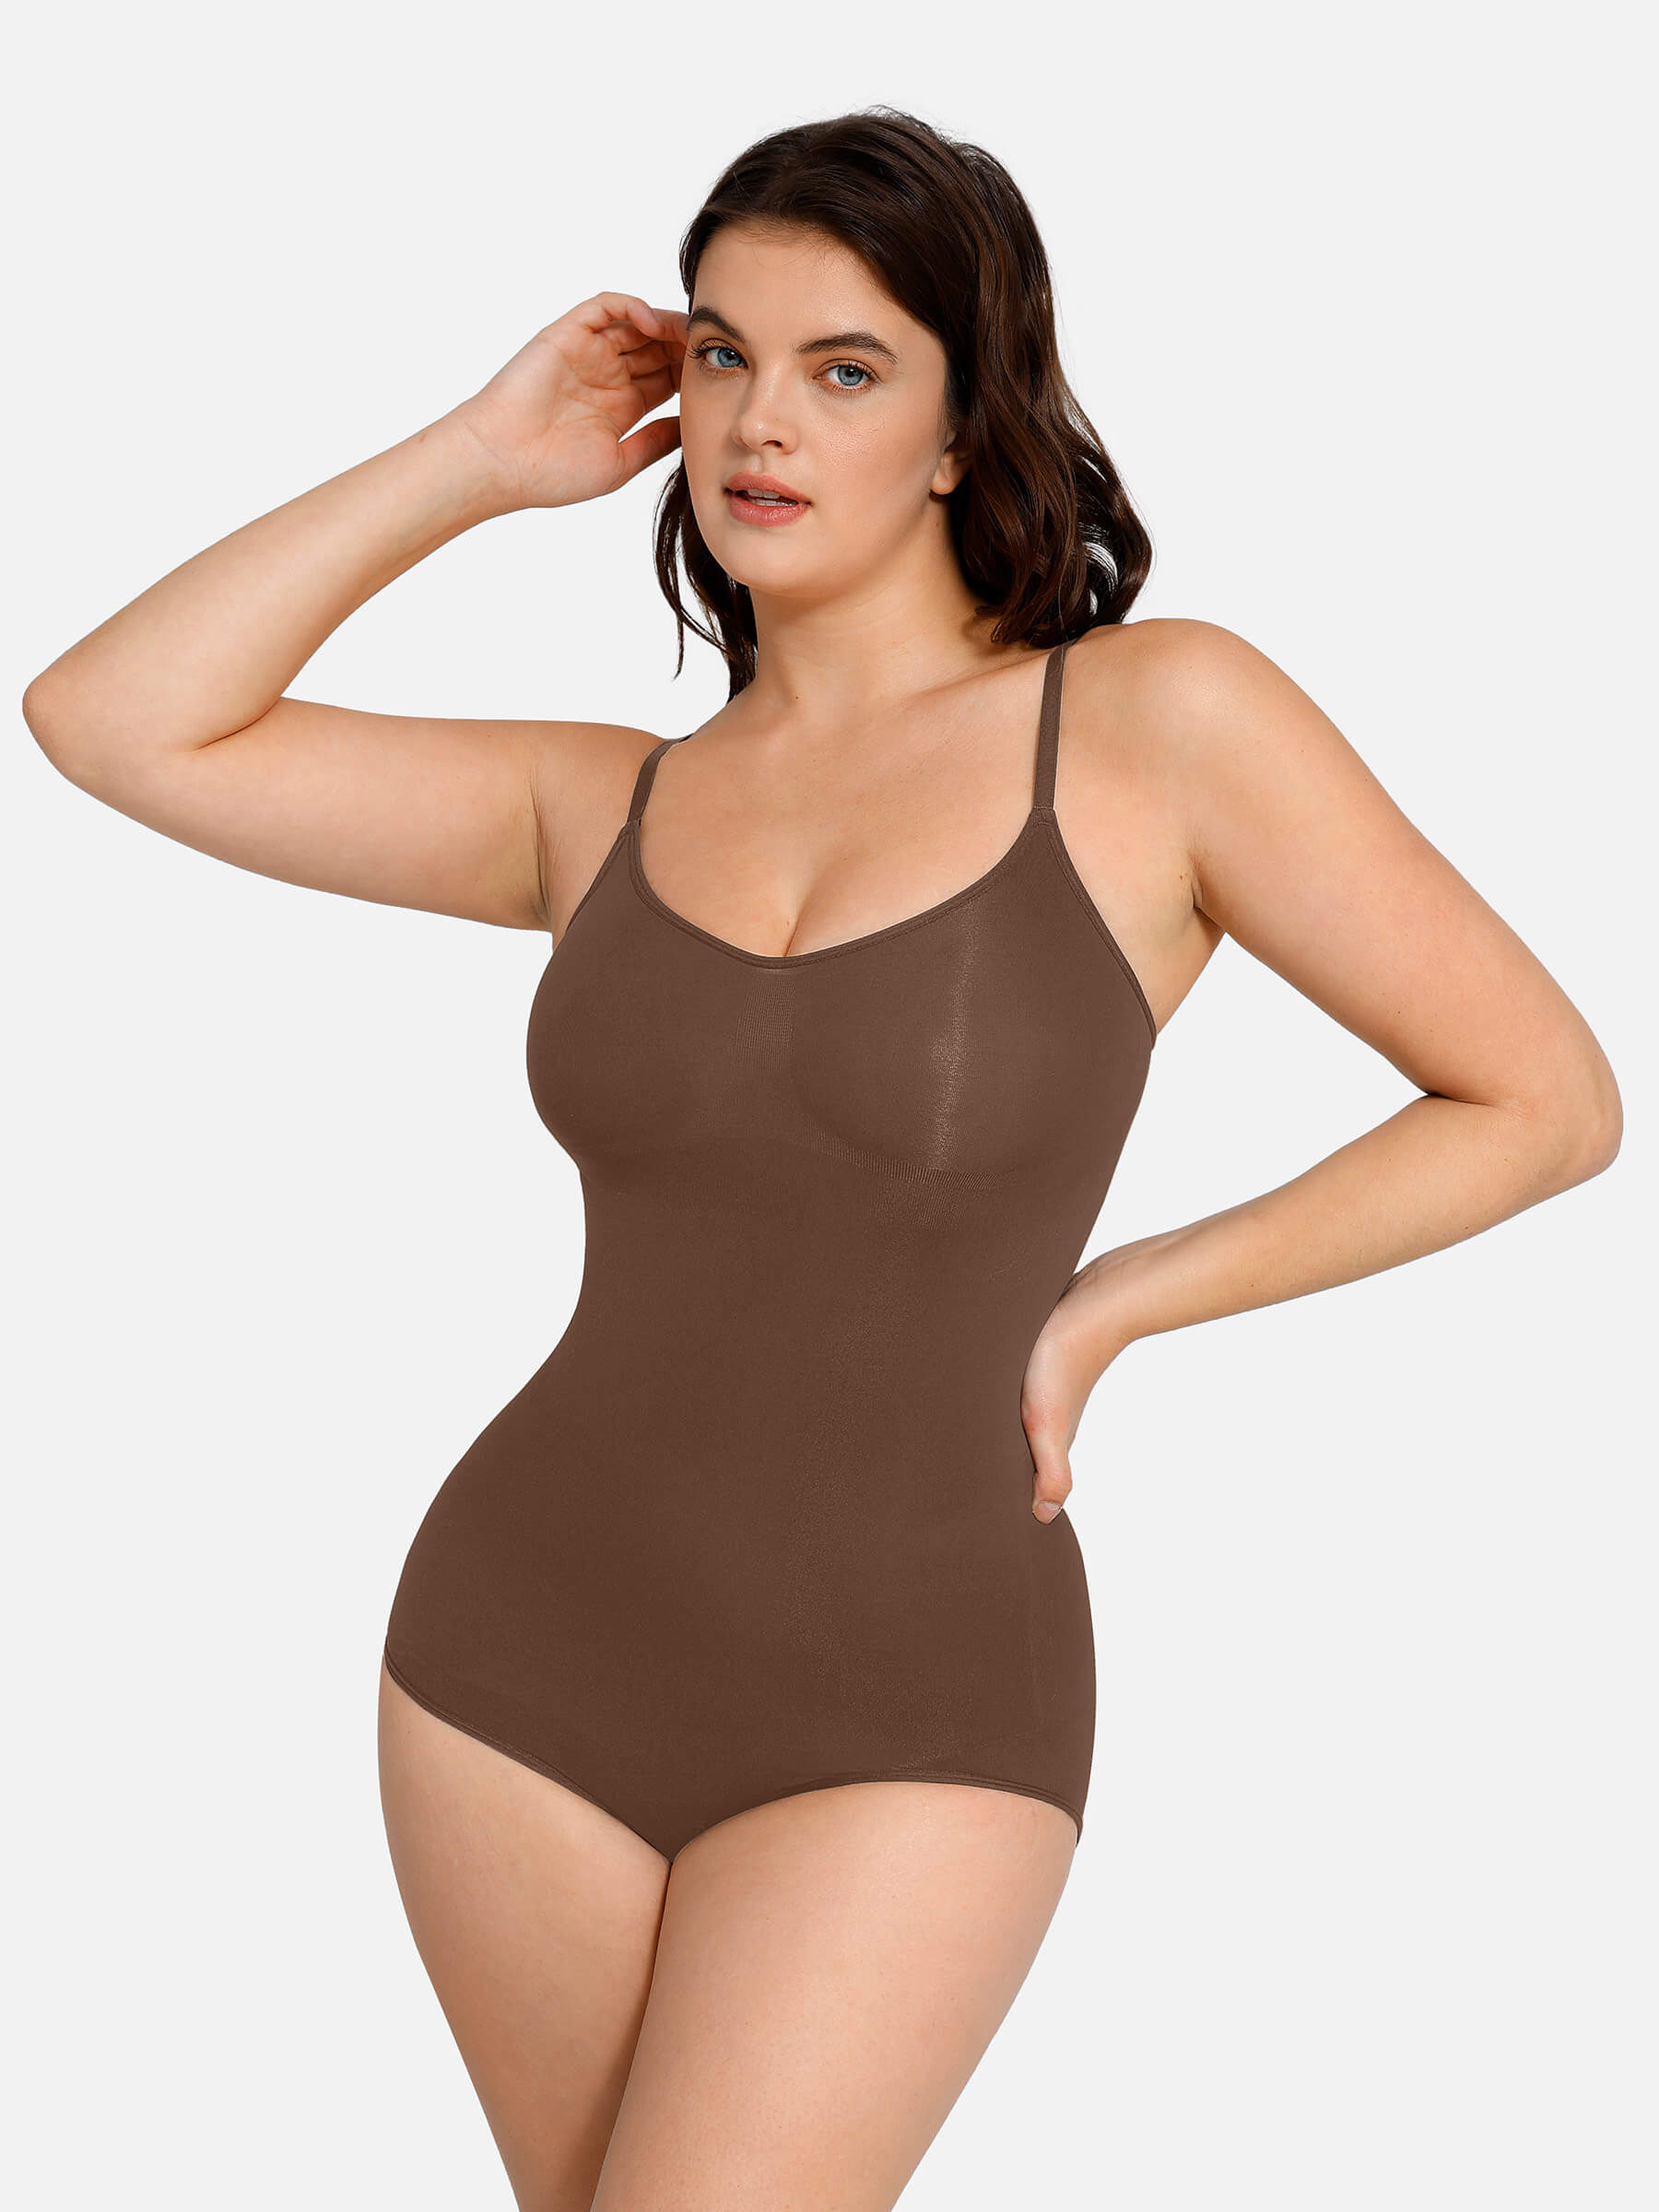 Sculpting Seamless Smoothing BodysuitKelly2014,./